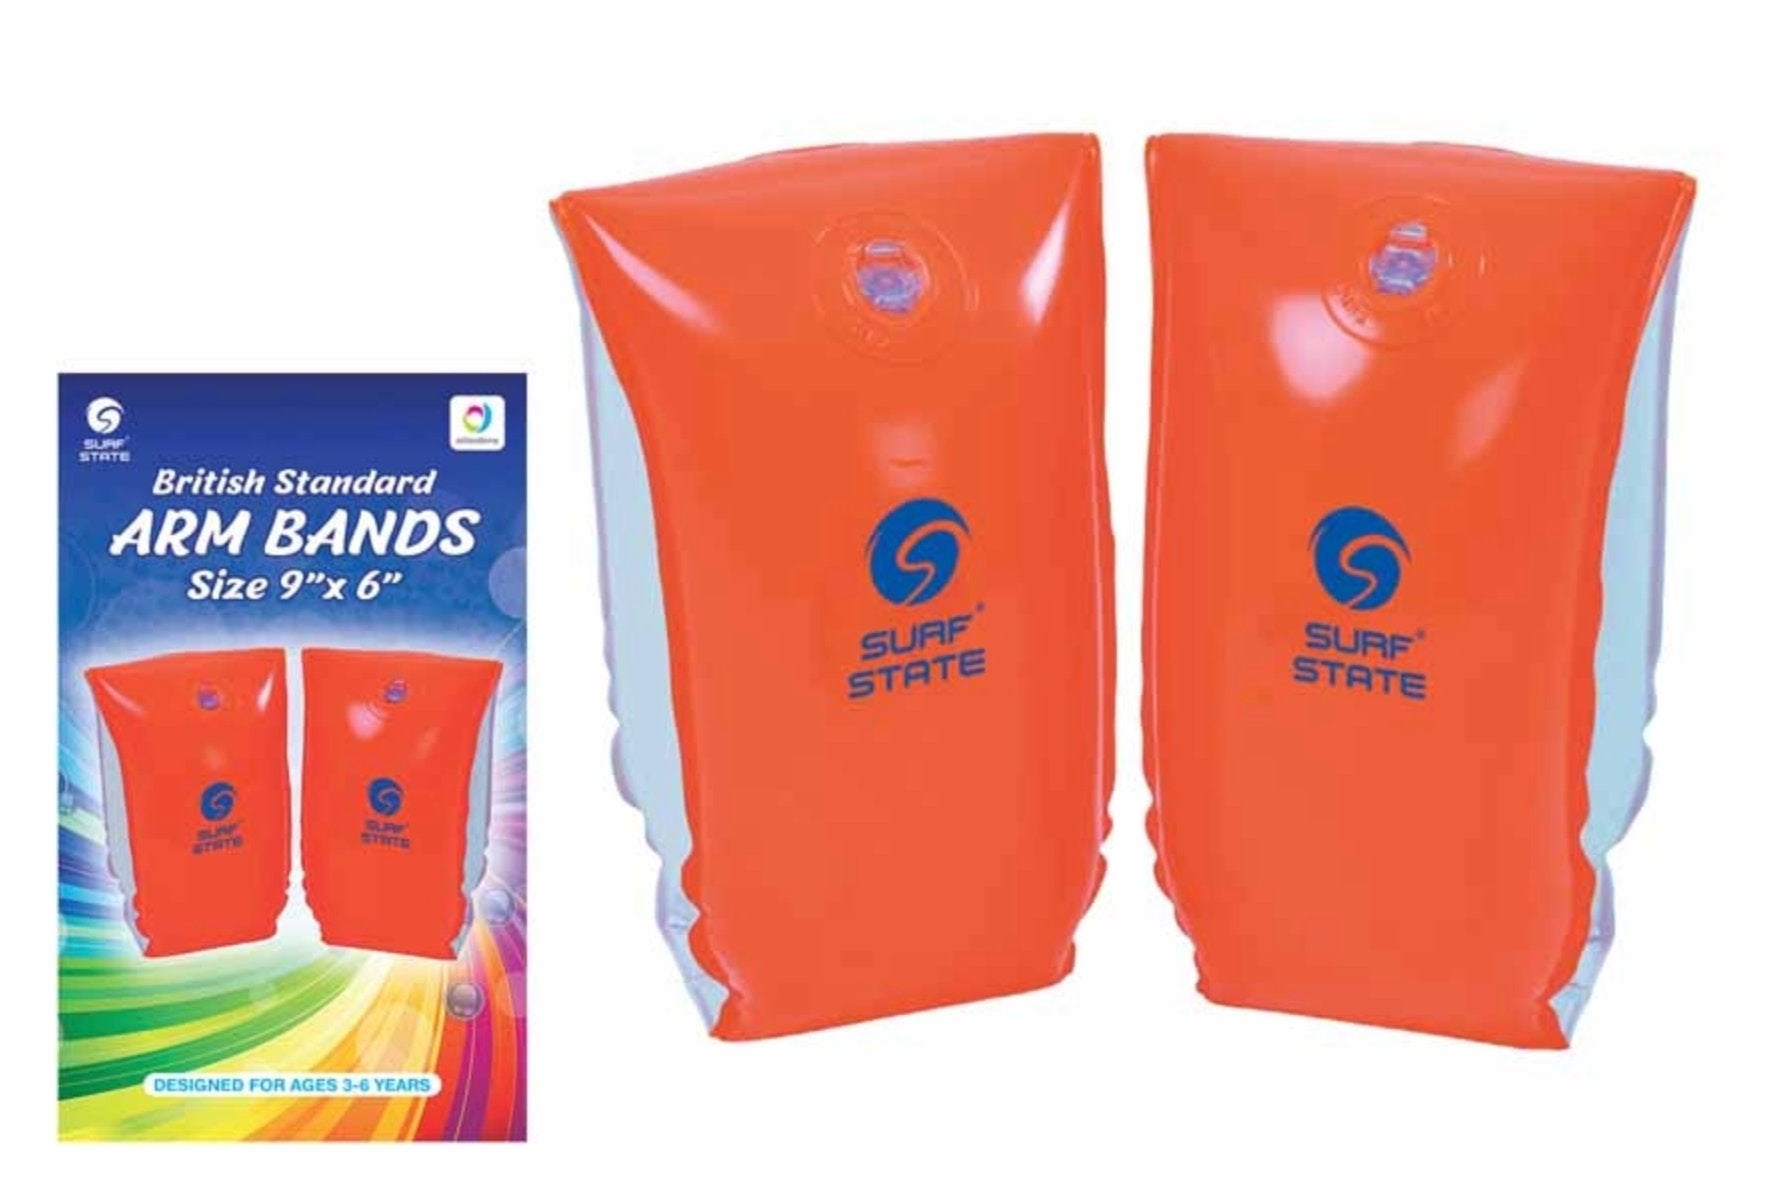 Arm Bands - Age 3-6 Years - Worthing Watersports - BN83 - Arm Bands - Beach Fun